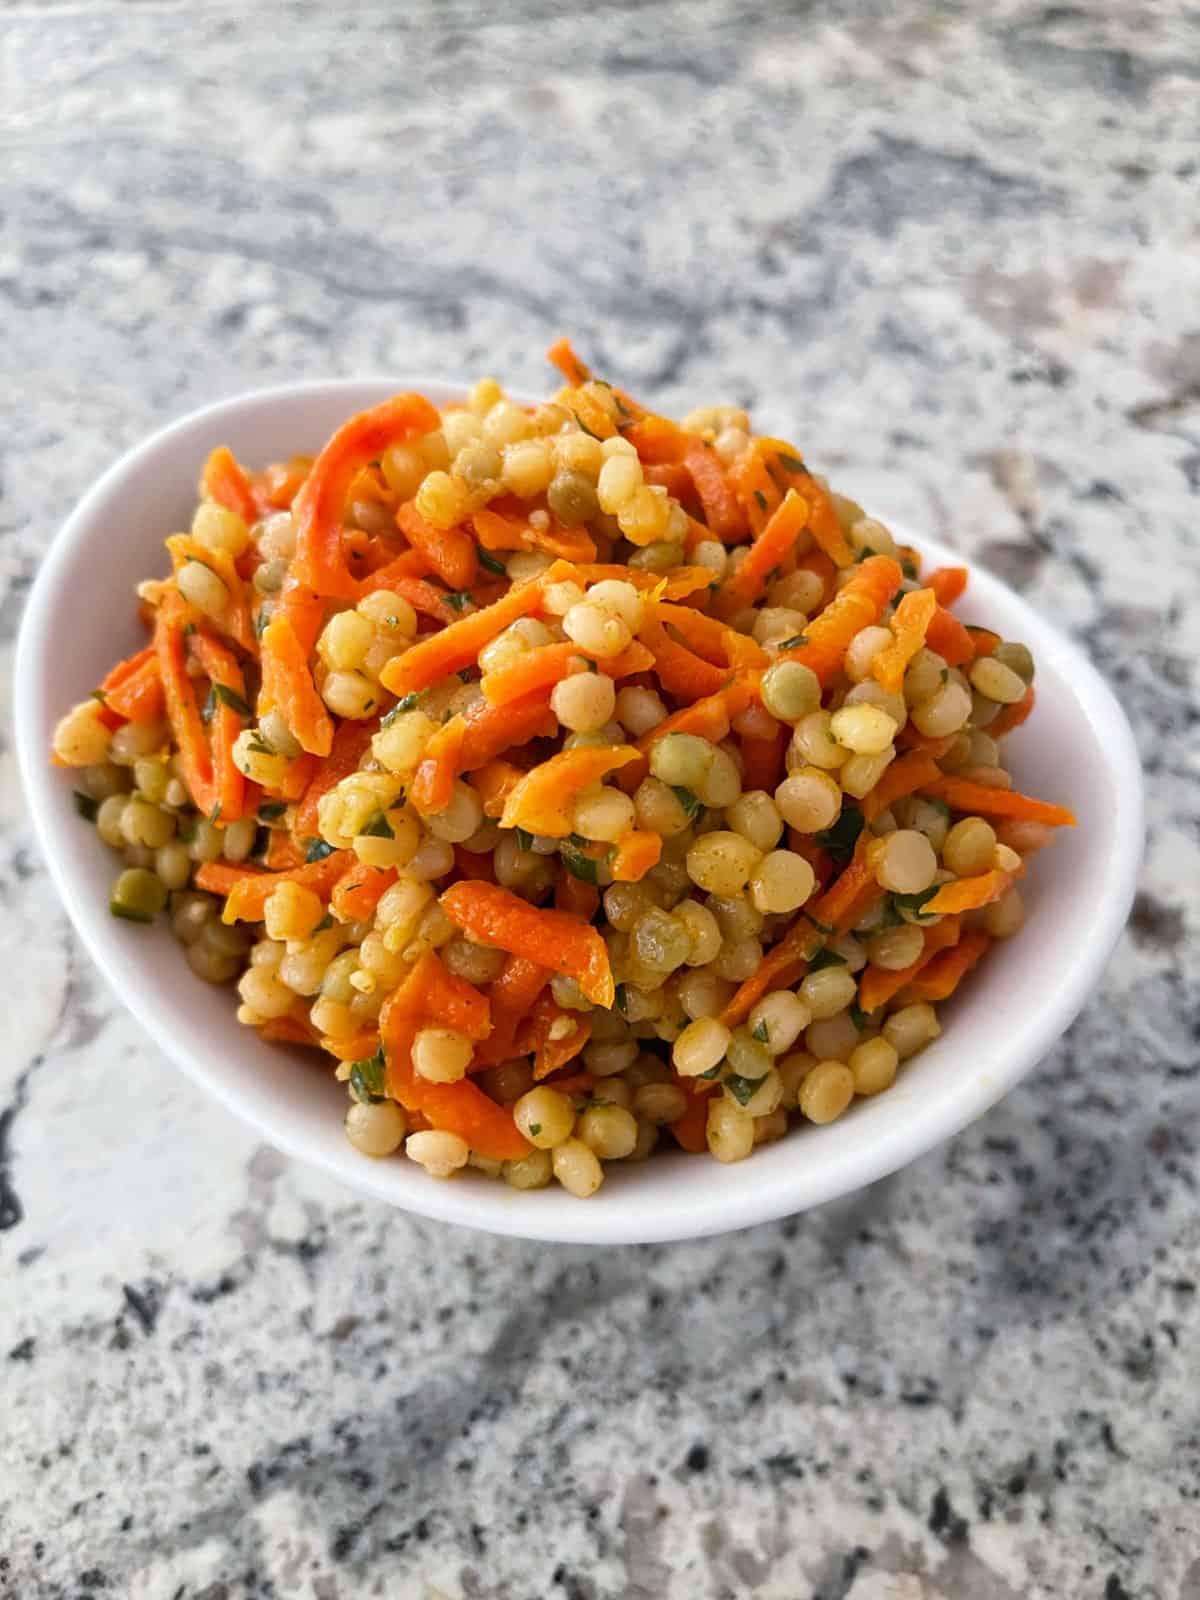 Simple carrot couscous salad in white bowl.